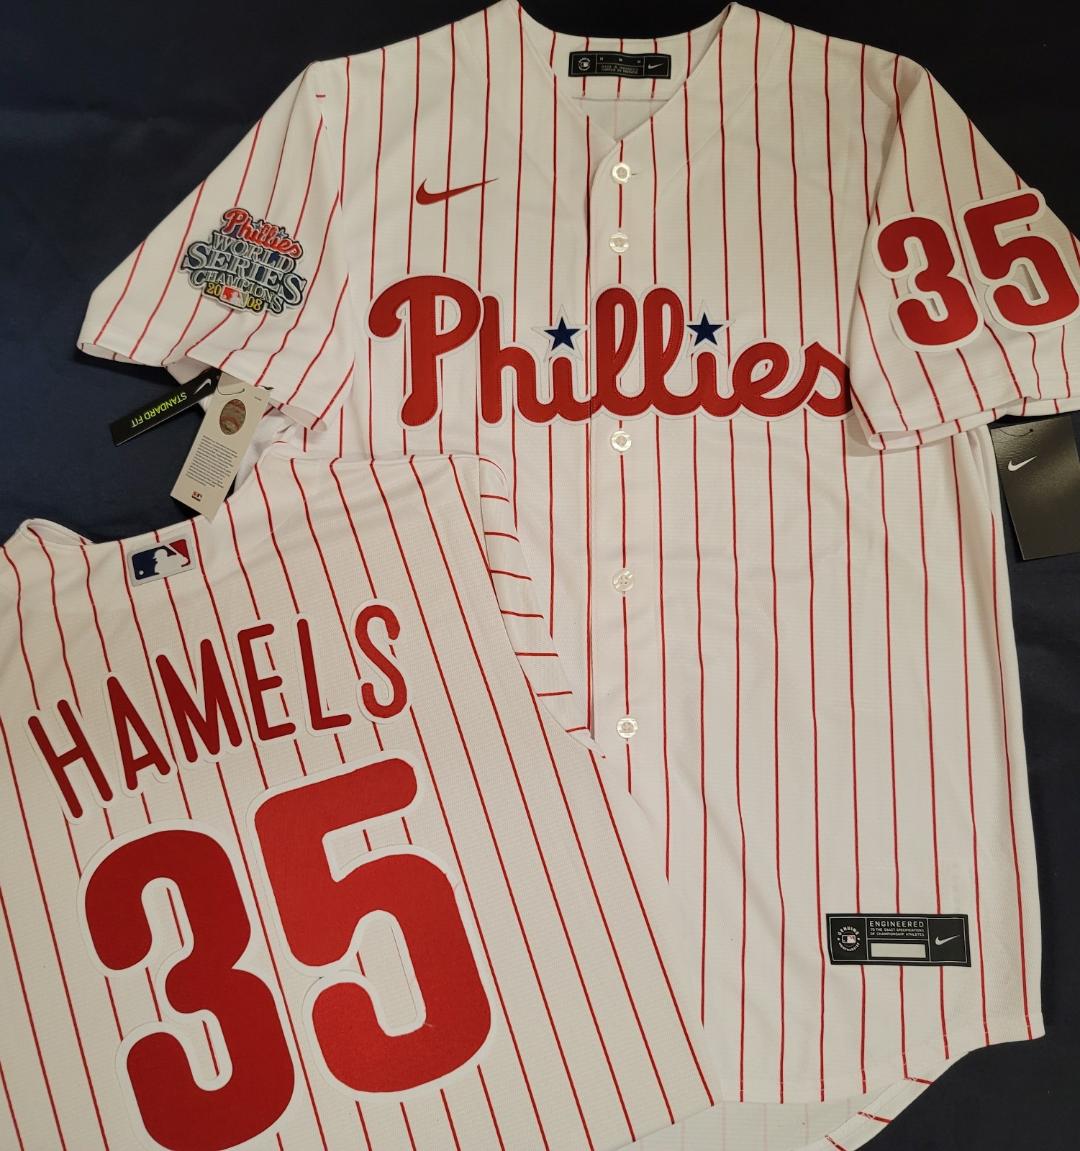 AntiqueSportsShop 2008 Cole Hamels Philadelphia Phillies World Series Size 48 Majestic Baseball Jersey - All Lettering / Numbers Sewn - Beautiful Jersey